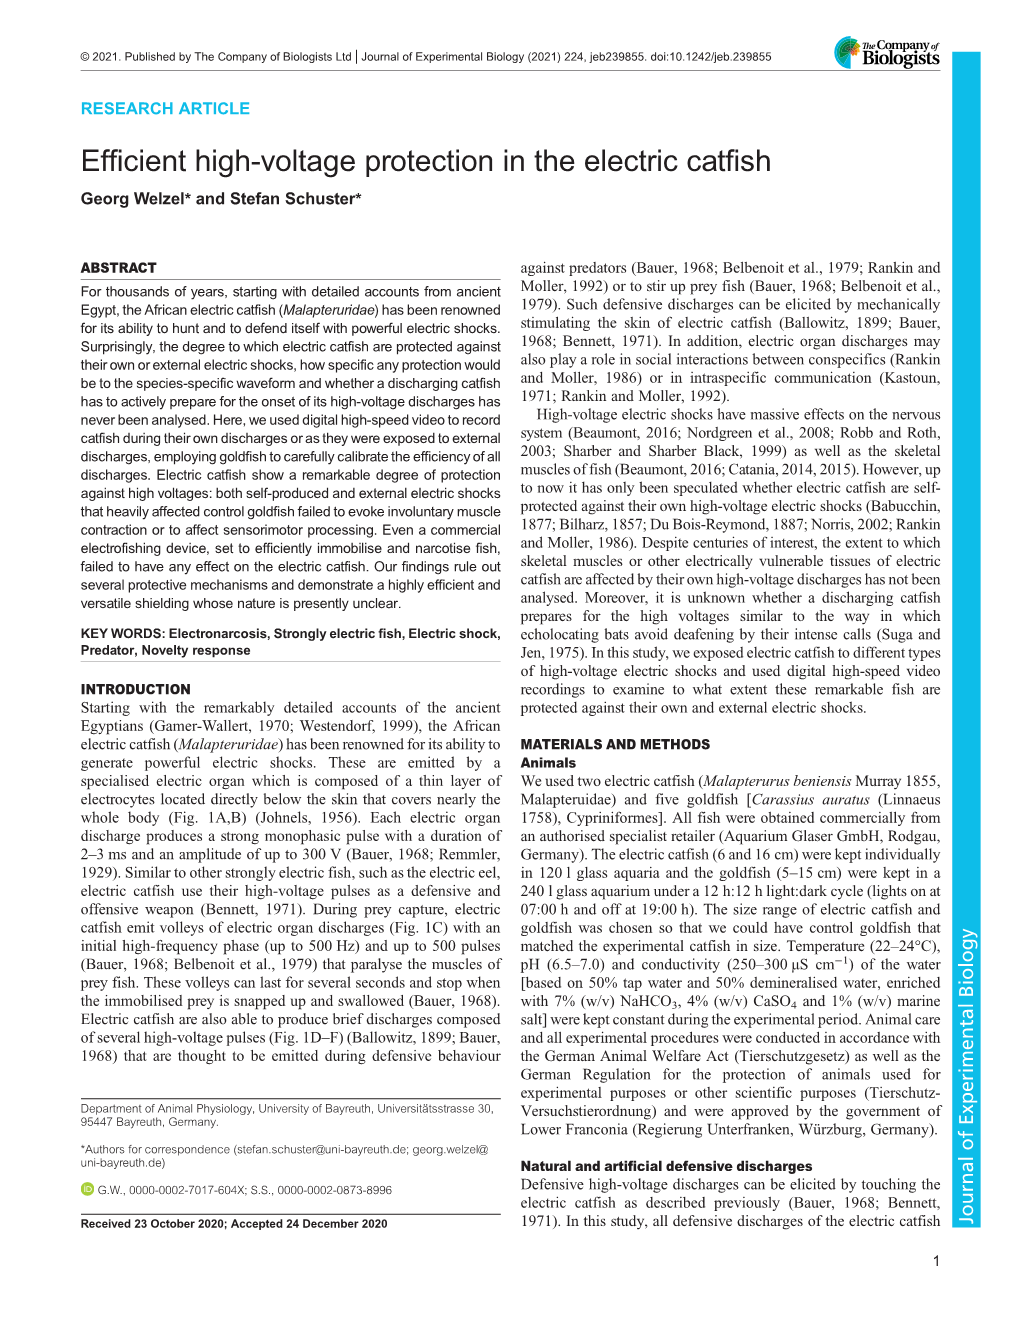 Efficient High-Voltage Protection in the Electric Catfish Georg Welzel* and Stefan Schuster*